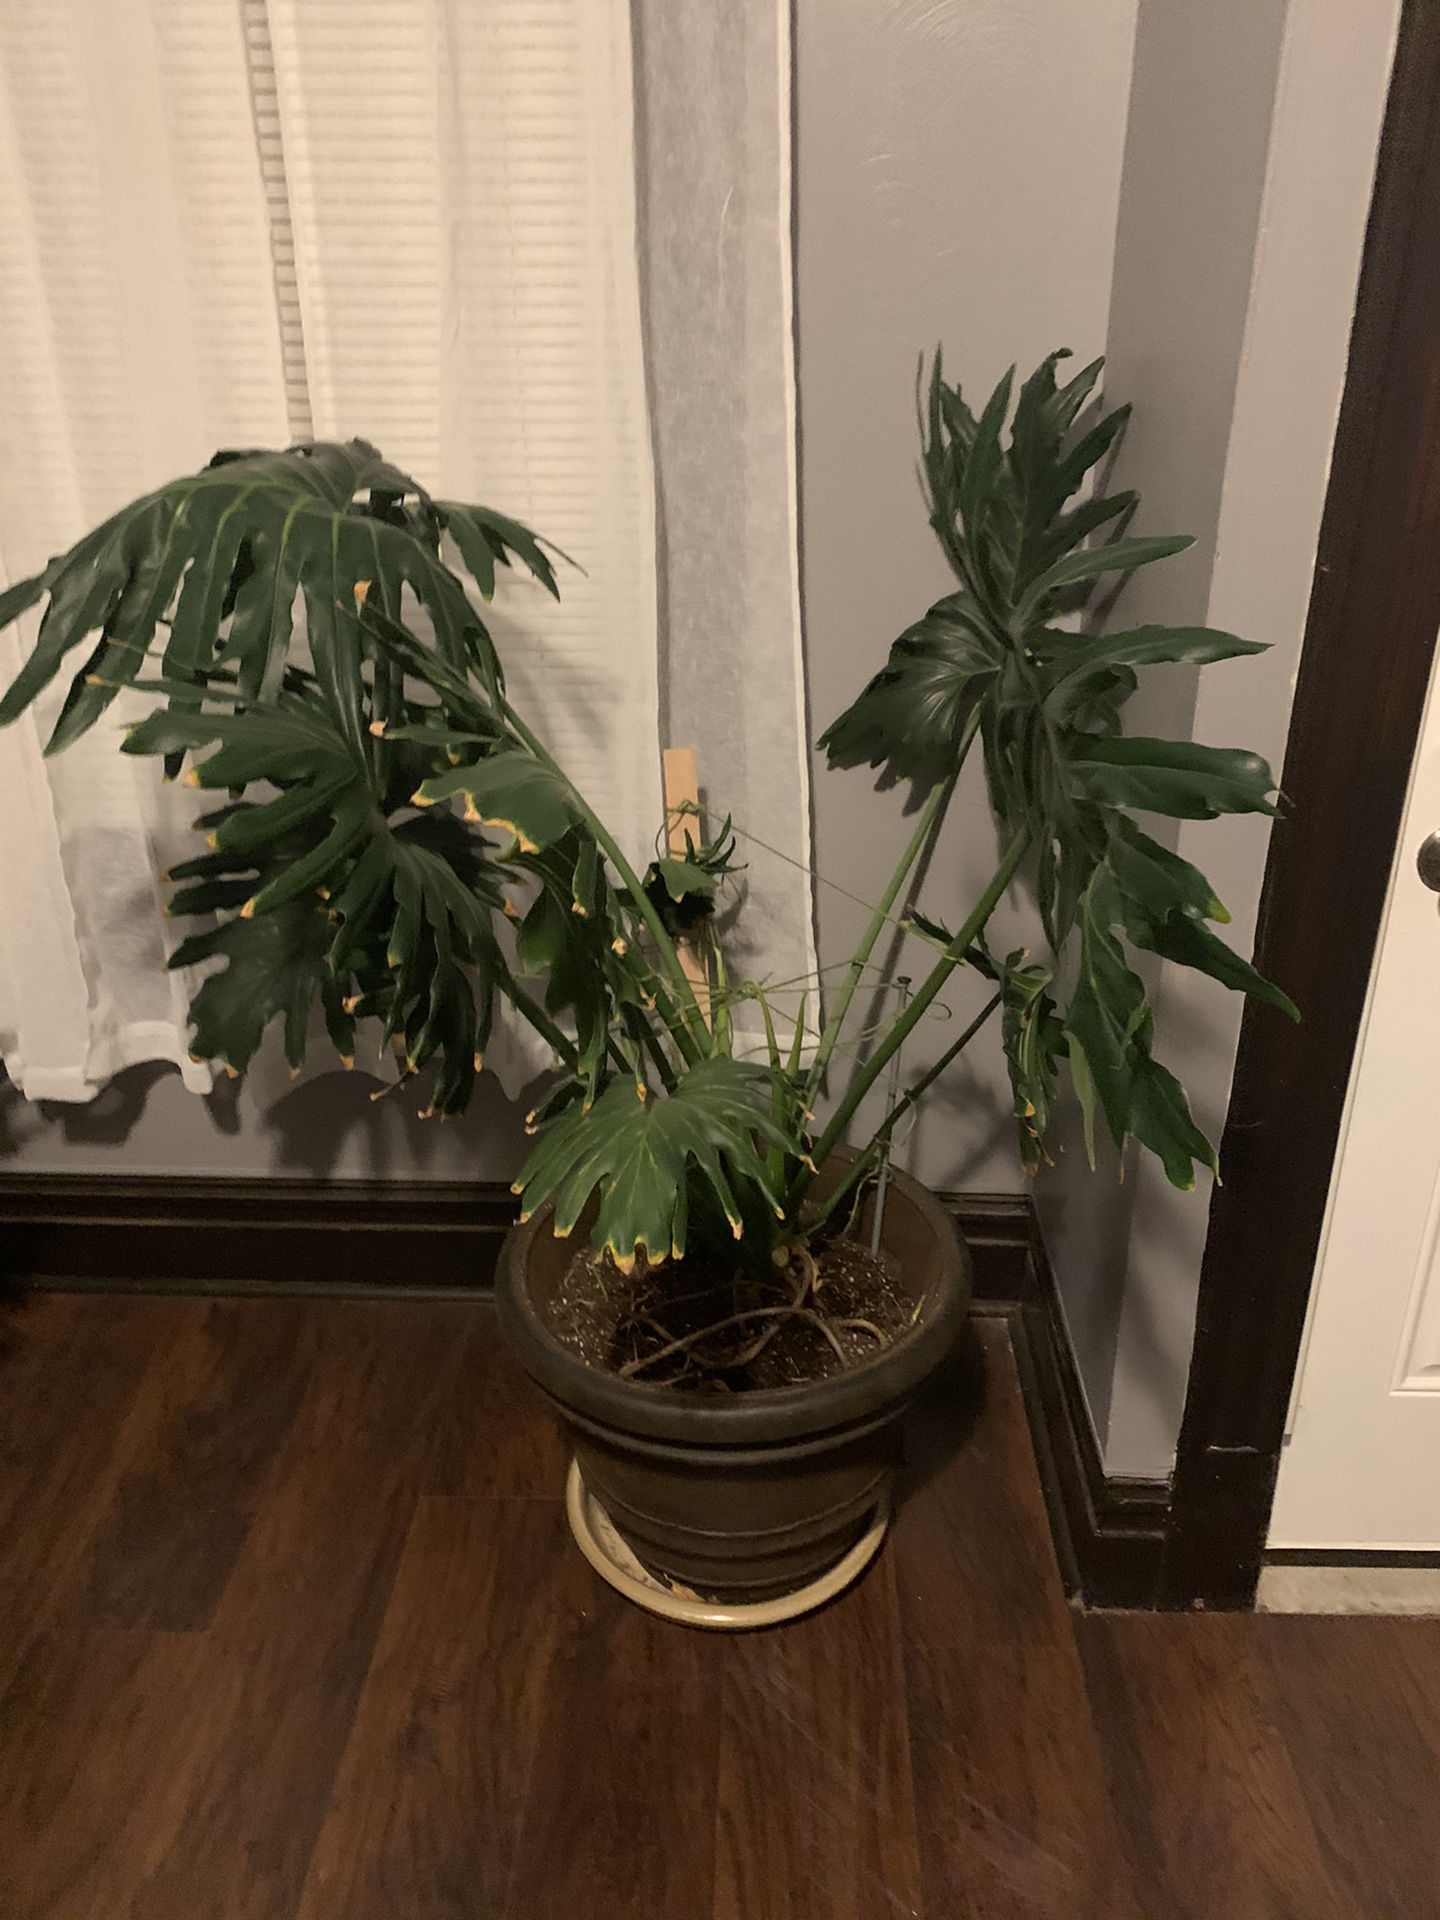 philodendron hope selloum plant need gone ASAP